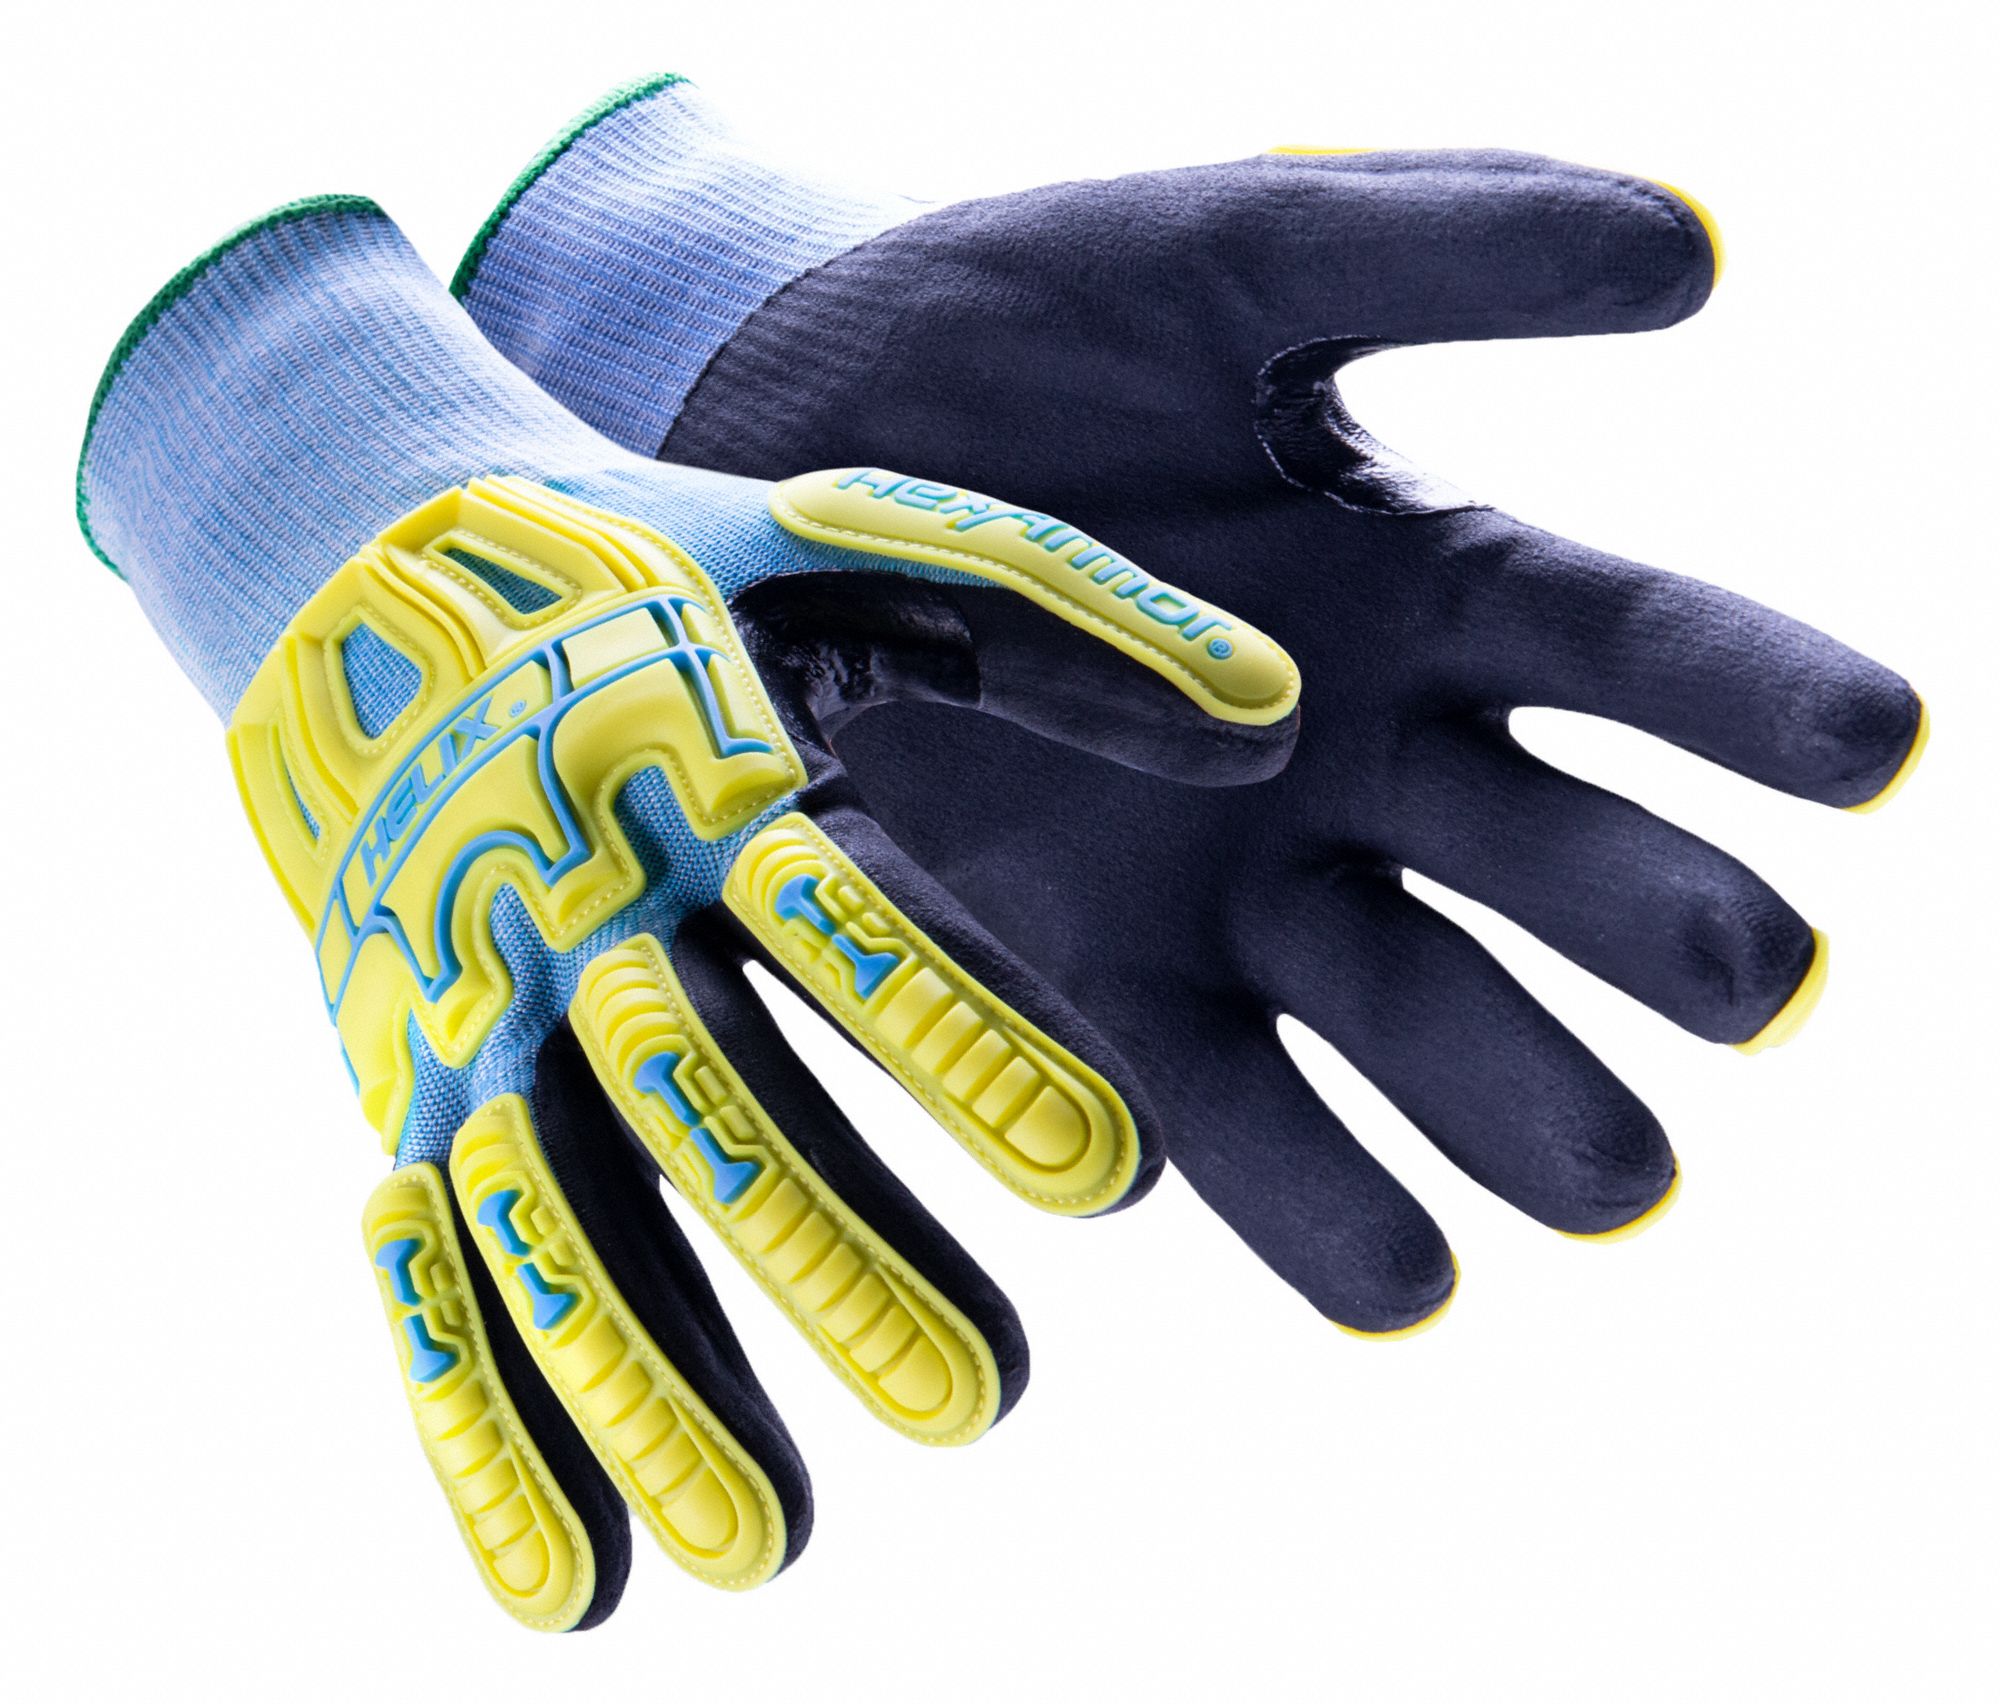 HEXARMOR KNIT GLOVES, 2XL (11), ANSI CUT LEVEL A5, ANSI IMPACT LEVEL 2,  DIPPED PALM, SMOOTH - Knit Cut-Resistant Gloves - HEX3010XXL